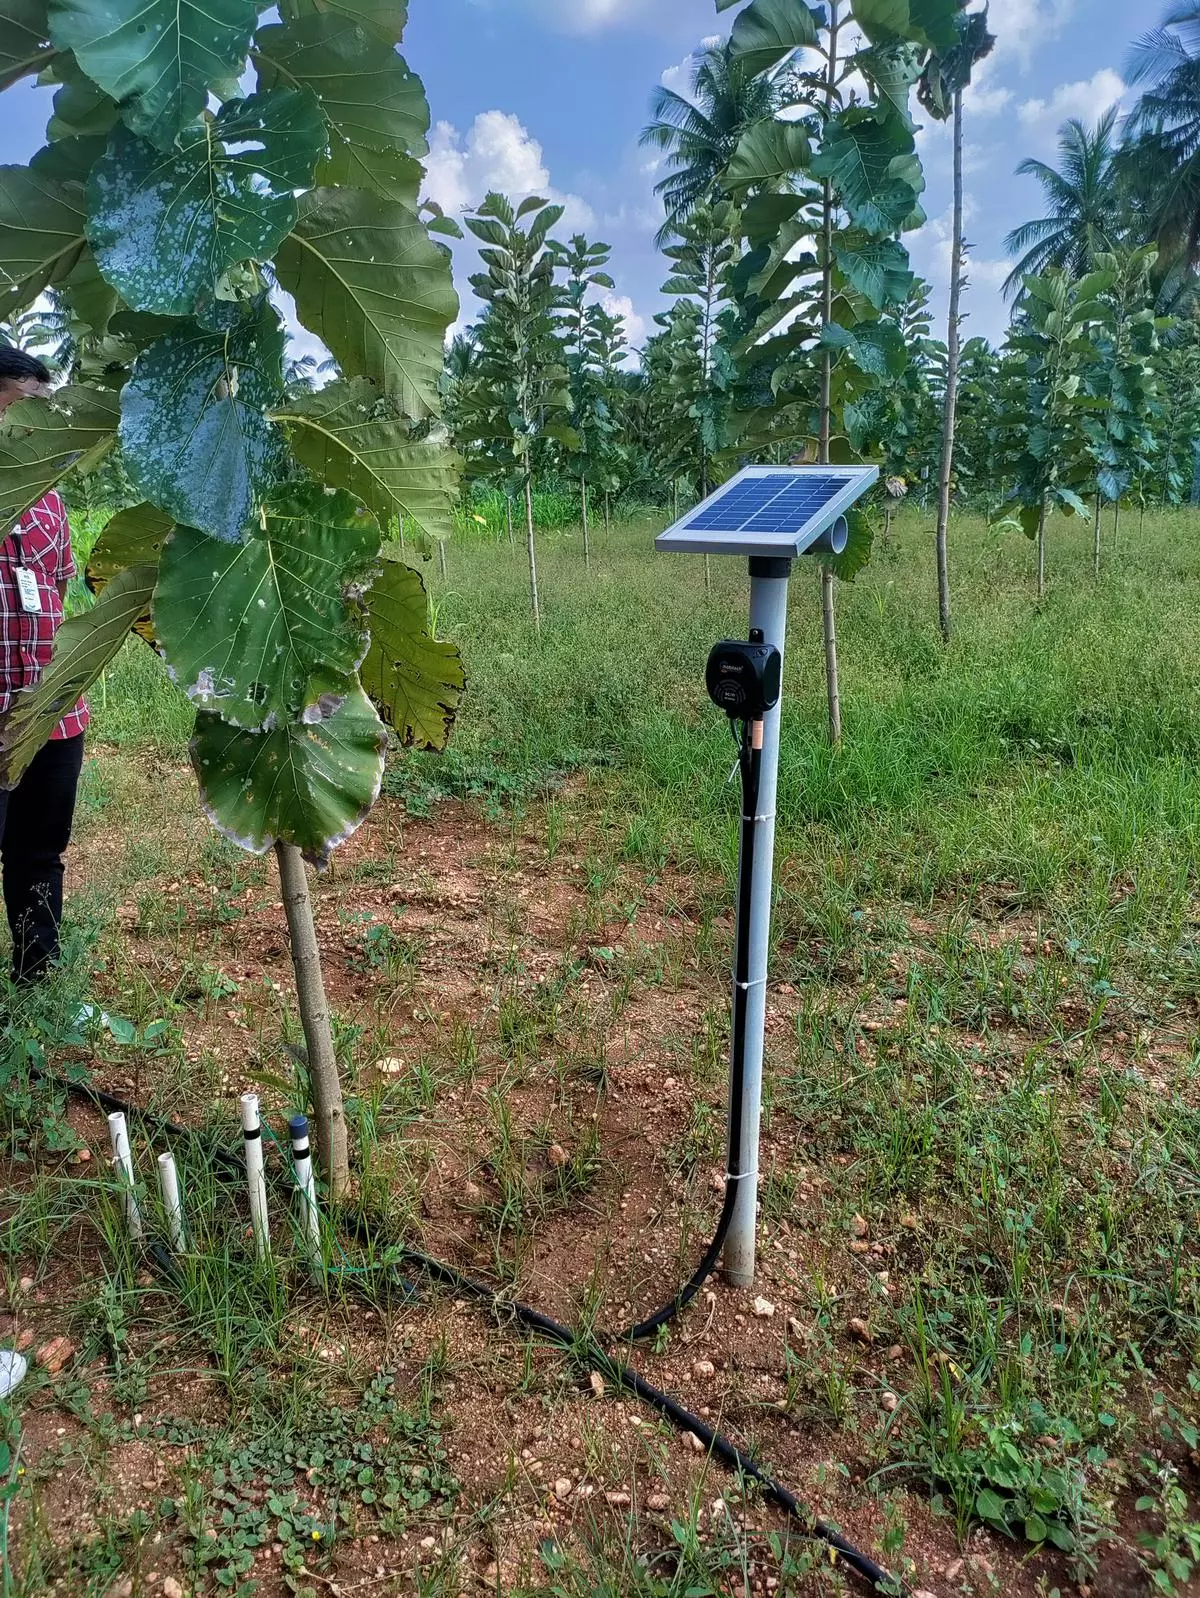 A solar-powered wireless transmitter for irrigation control